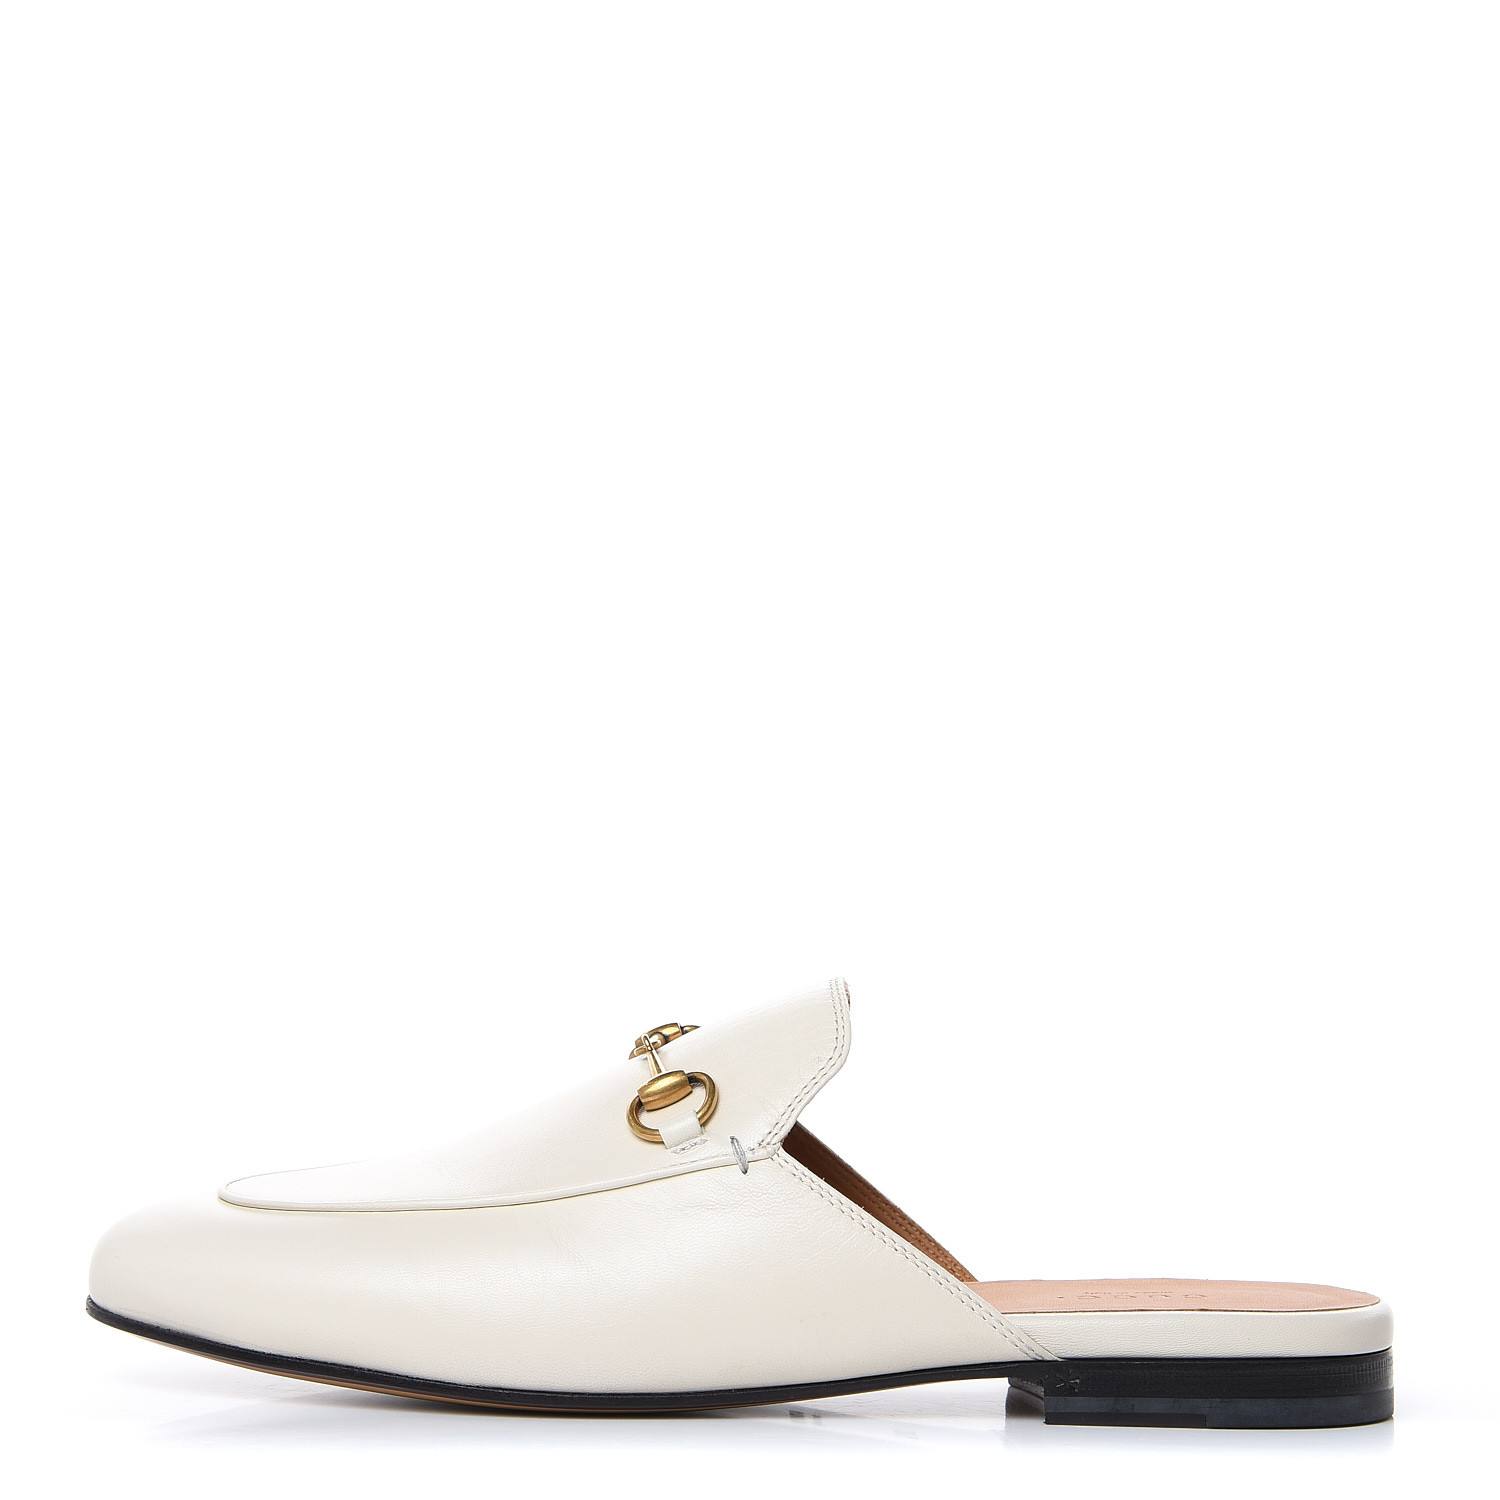 GUCCI Calfskin Princetown Womens Slippers 39.5 Mystic White 469008